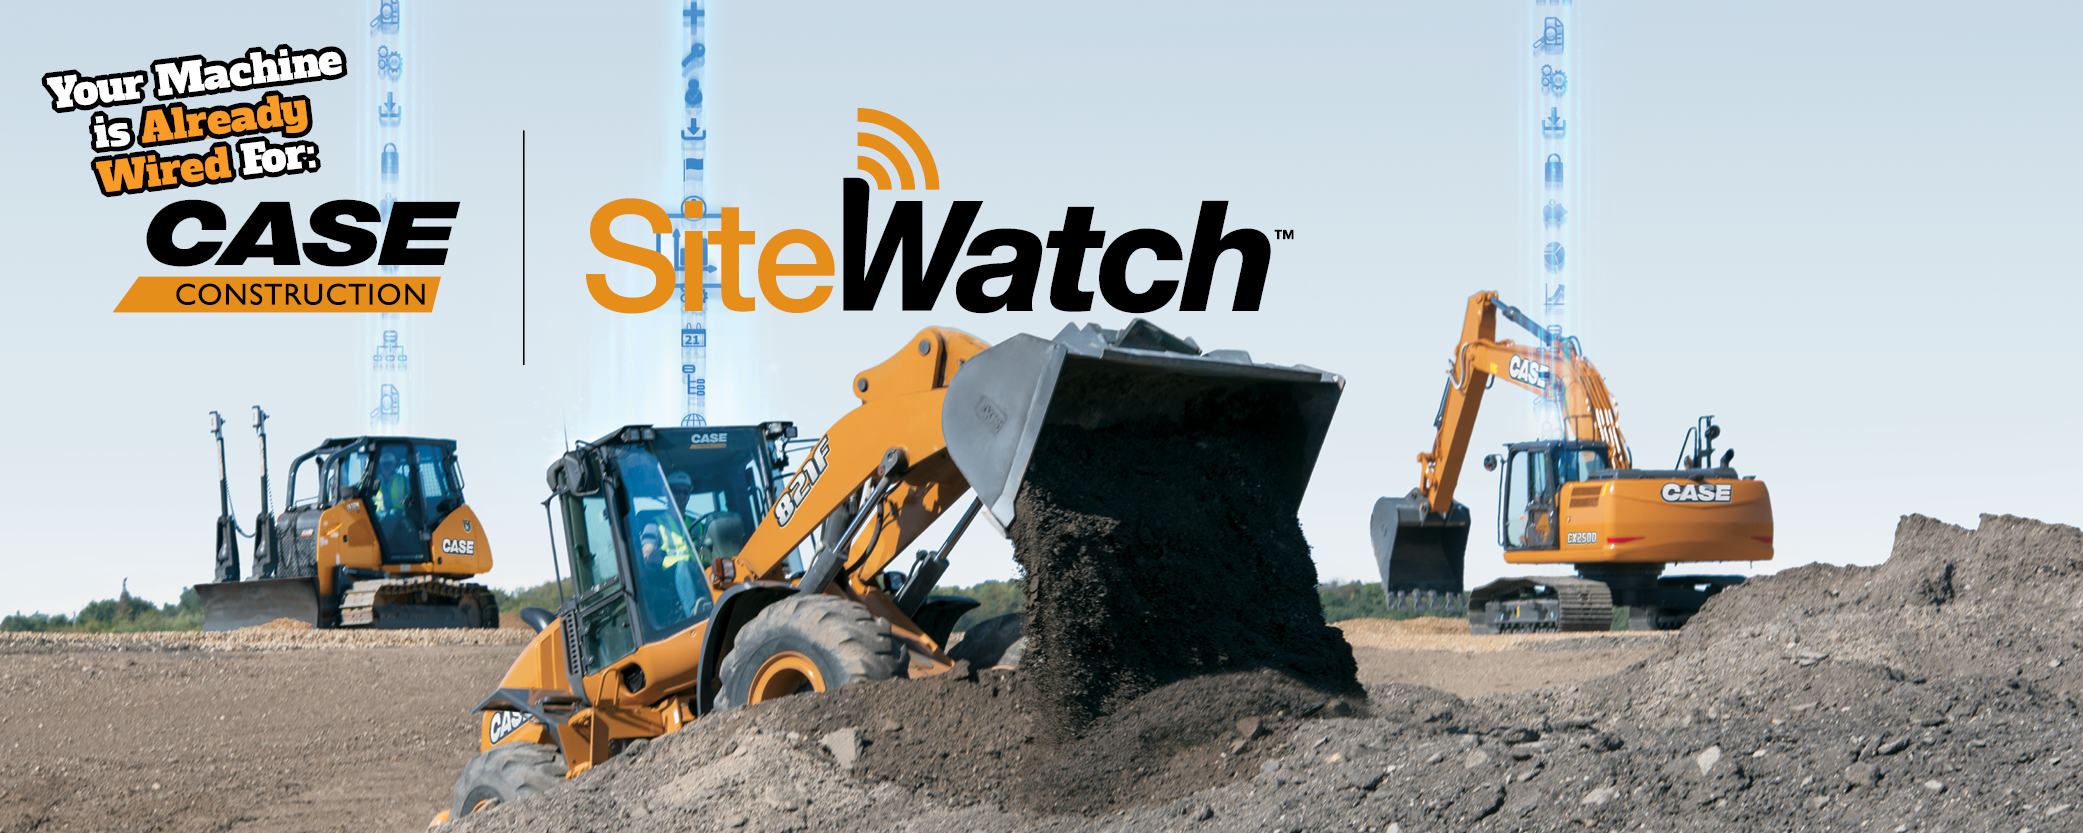 Reconnect With CASE SiteWatch™ Telematics